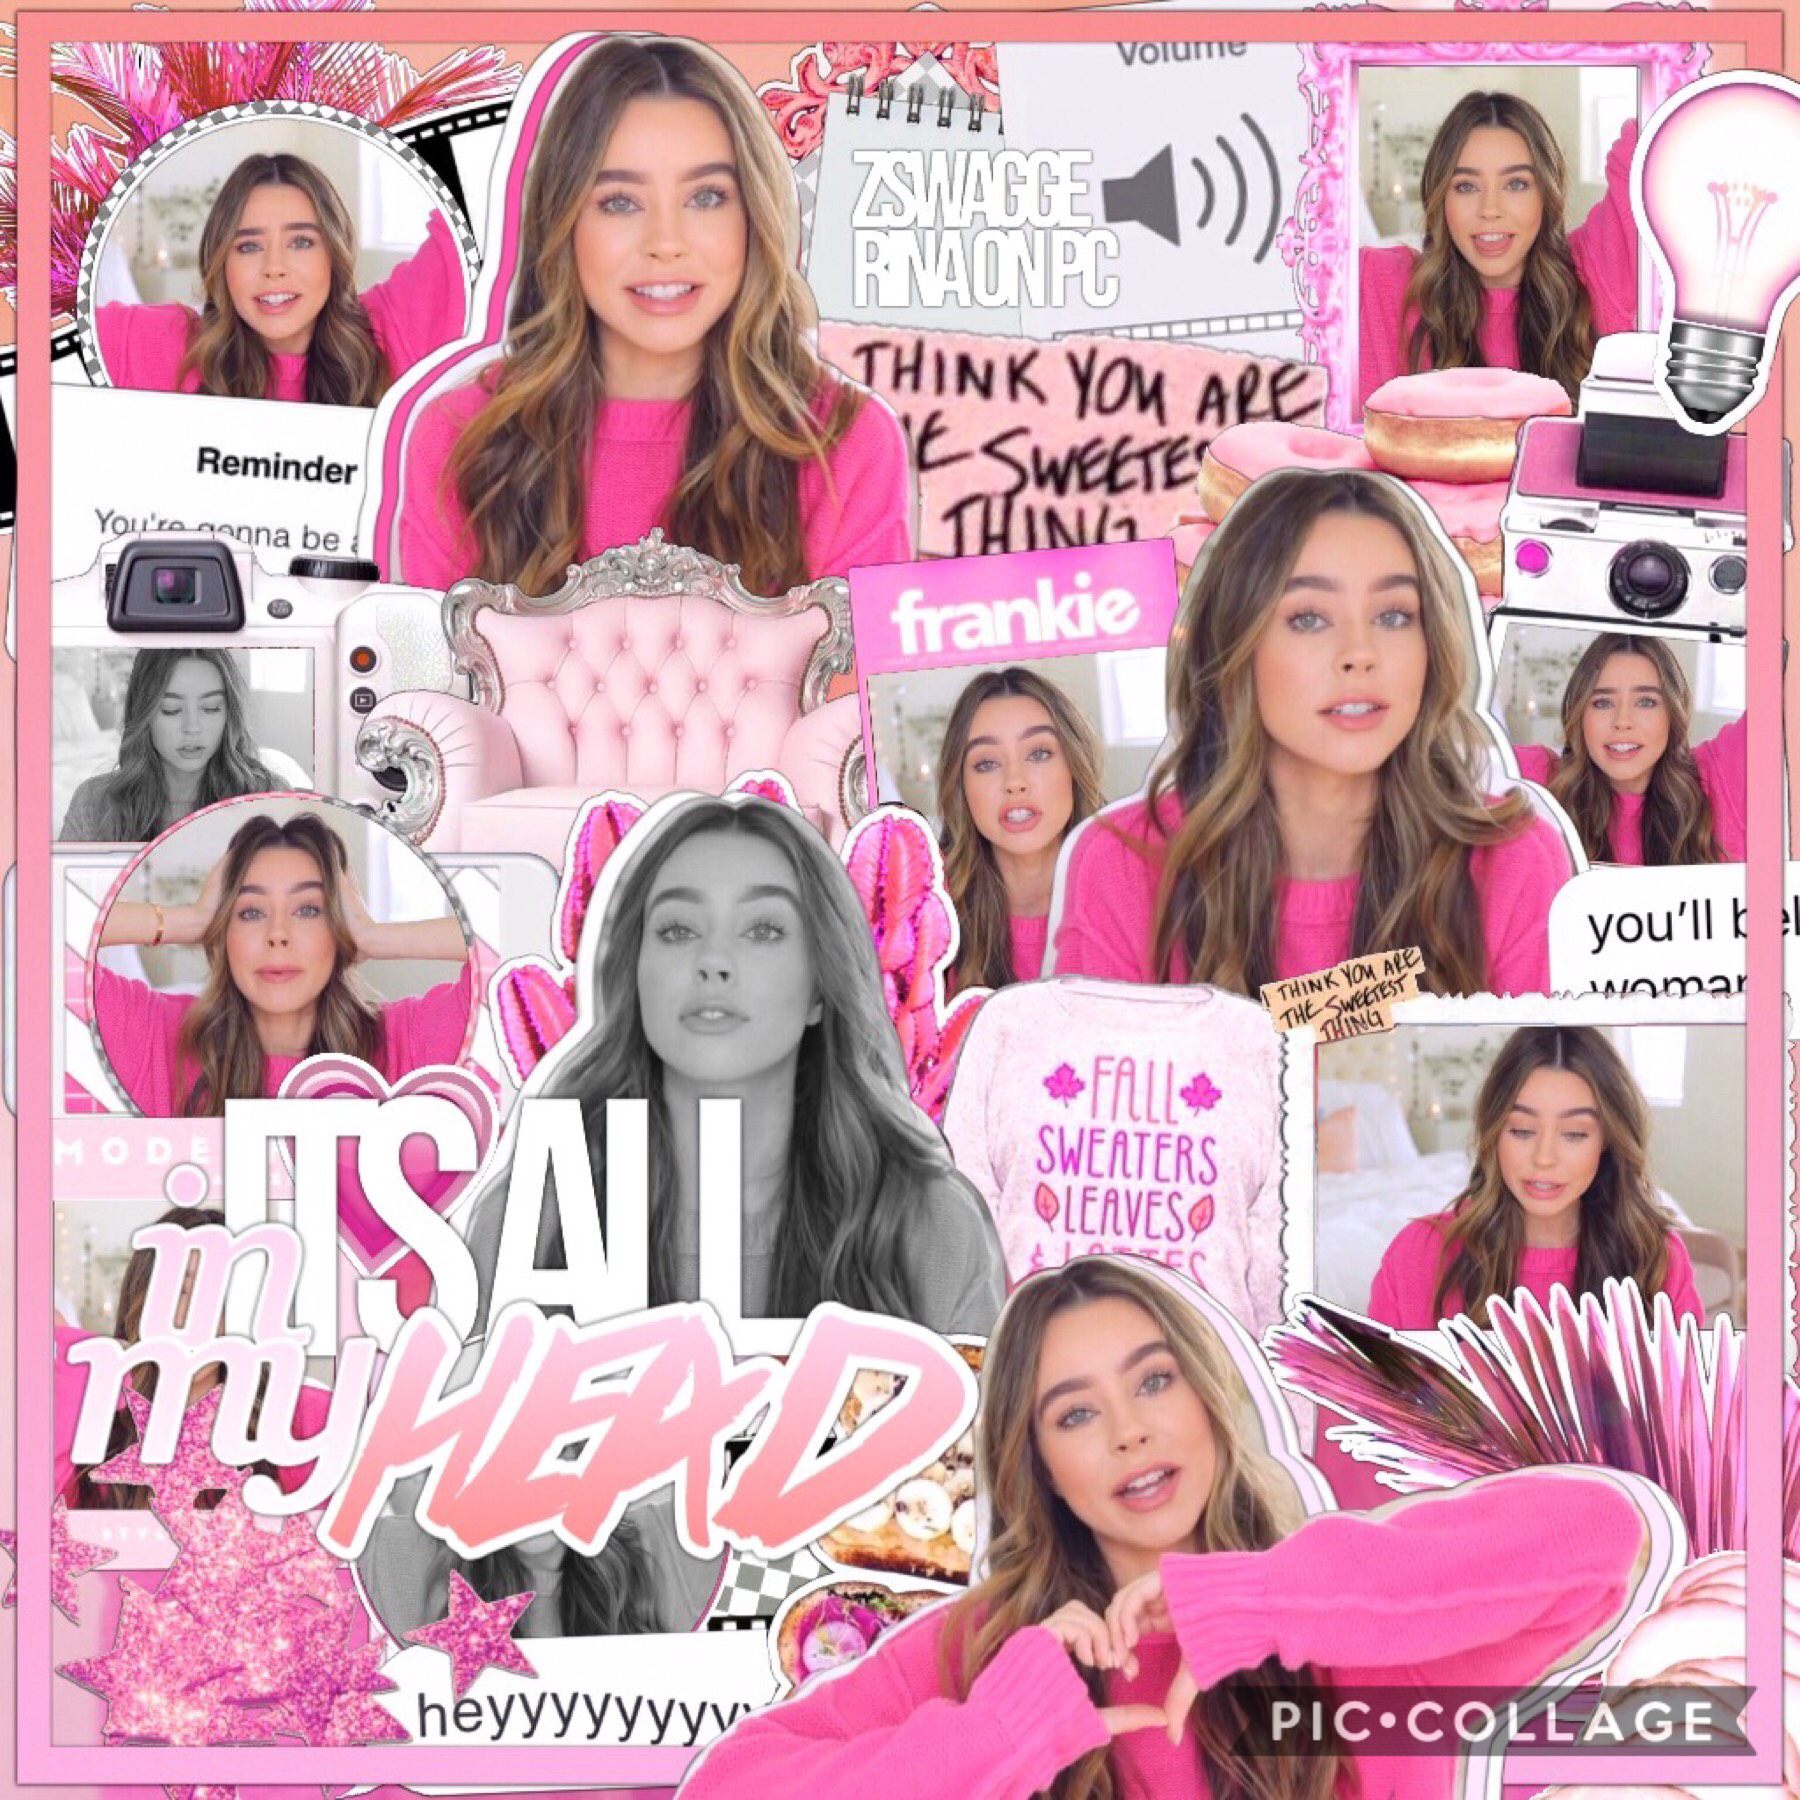 happy valentine's dayyyy ❣️ what are you doing for the occasion? i'm going shopping with my mom lol. 💌 also this collage is an explosion of pink i love it 😂💗